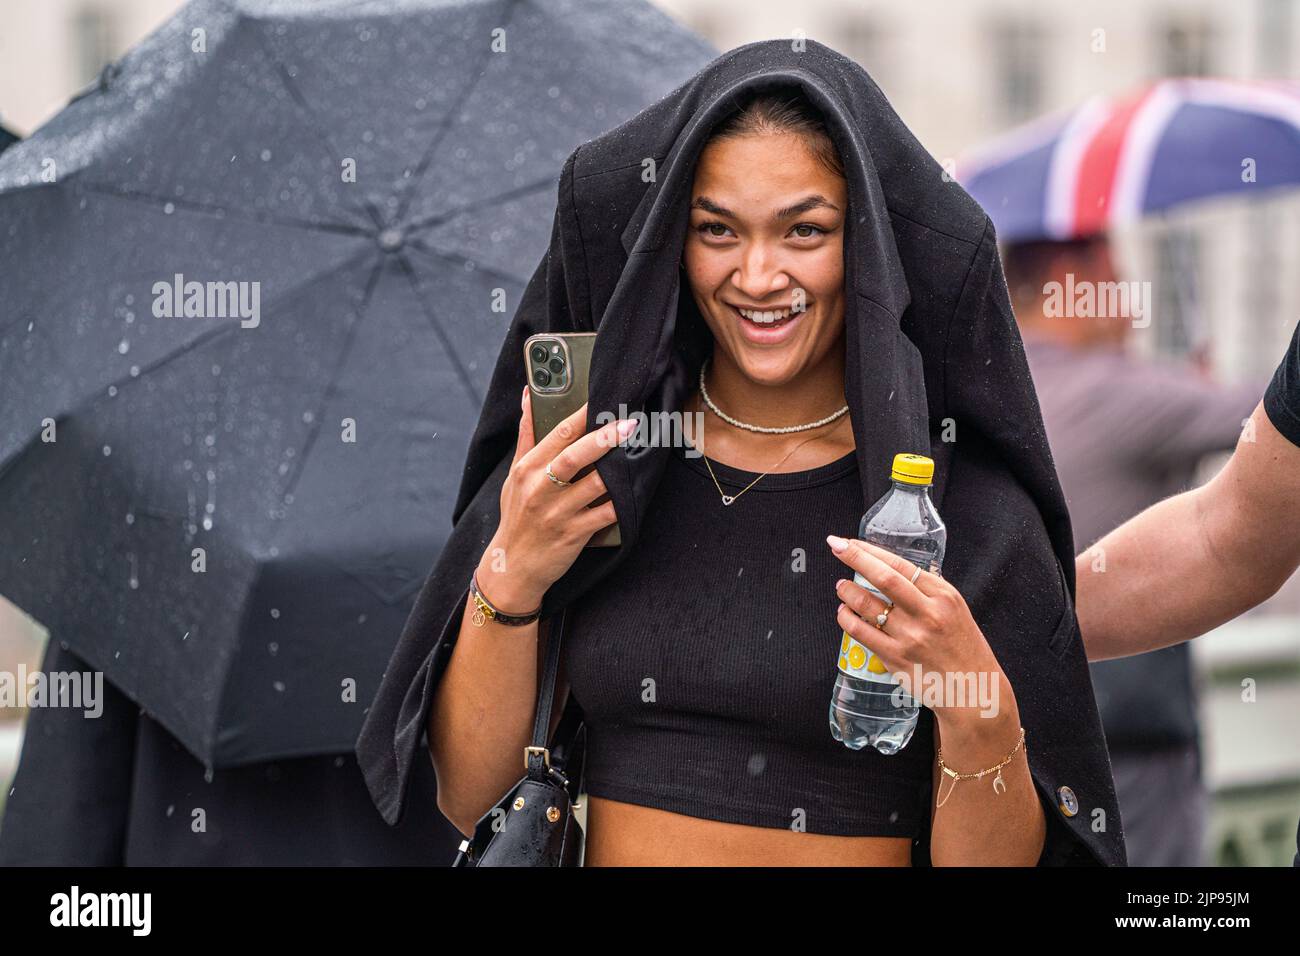 Westminster London, UK. 16 August 2022 . A pedestrian covers her head with a jacket  on Westminster bridge  during rain showers as the drought ends  after the prolonged dry spell and the driest summer in 46 years as the met office issues a yellow warning for thunderstorms and flash floods . Credit. amer ghazzal/Alamy Live News Stock Photo